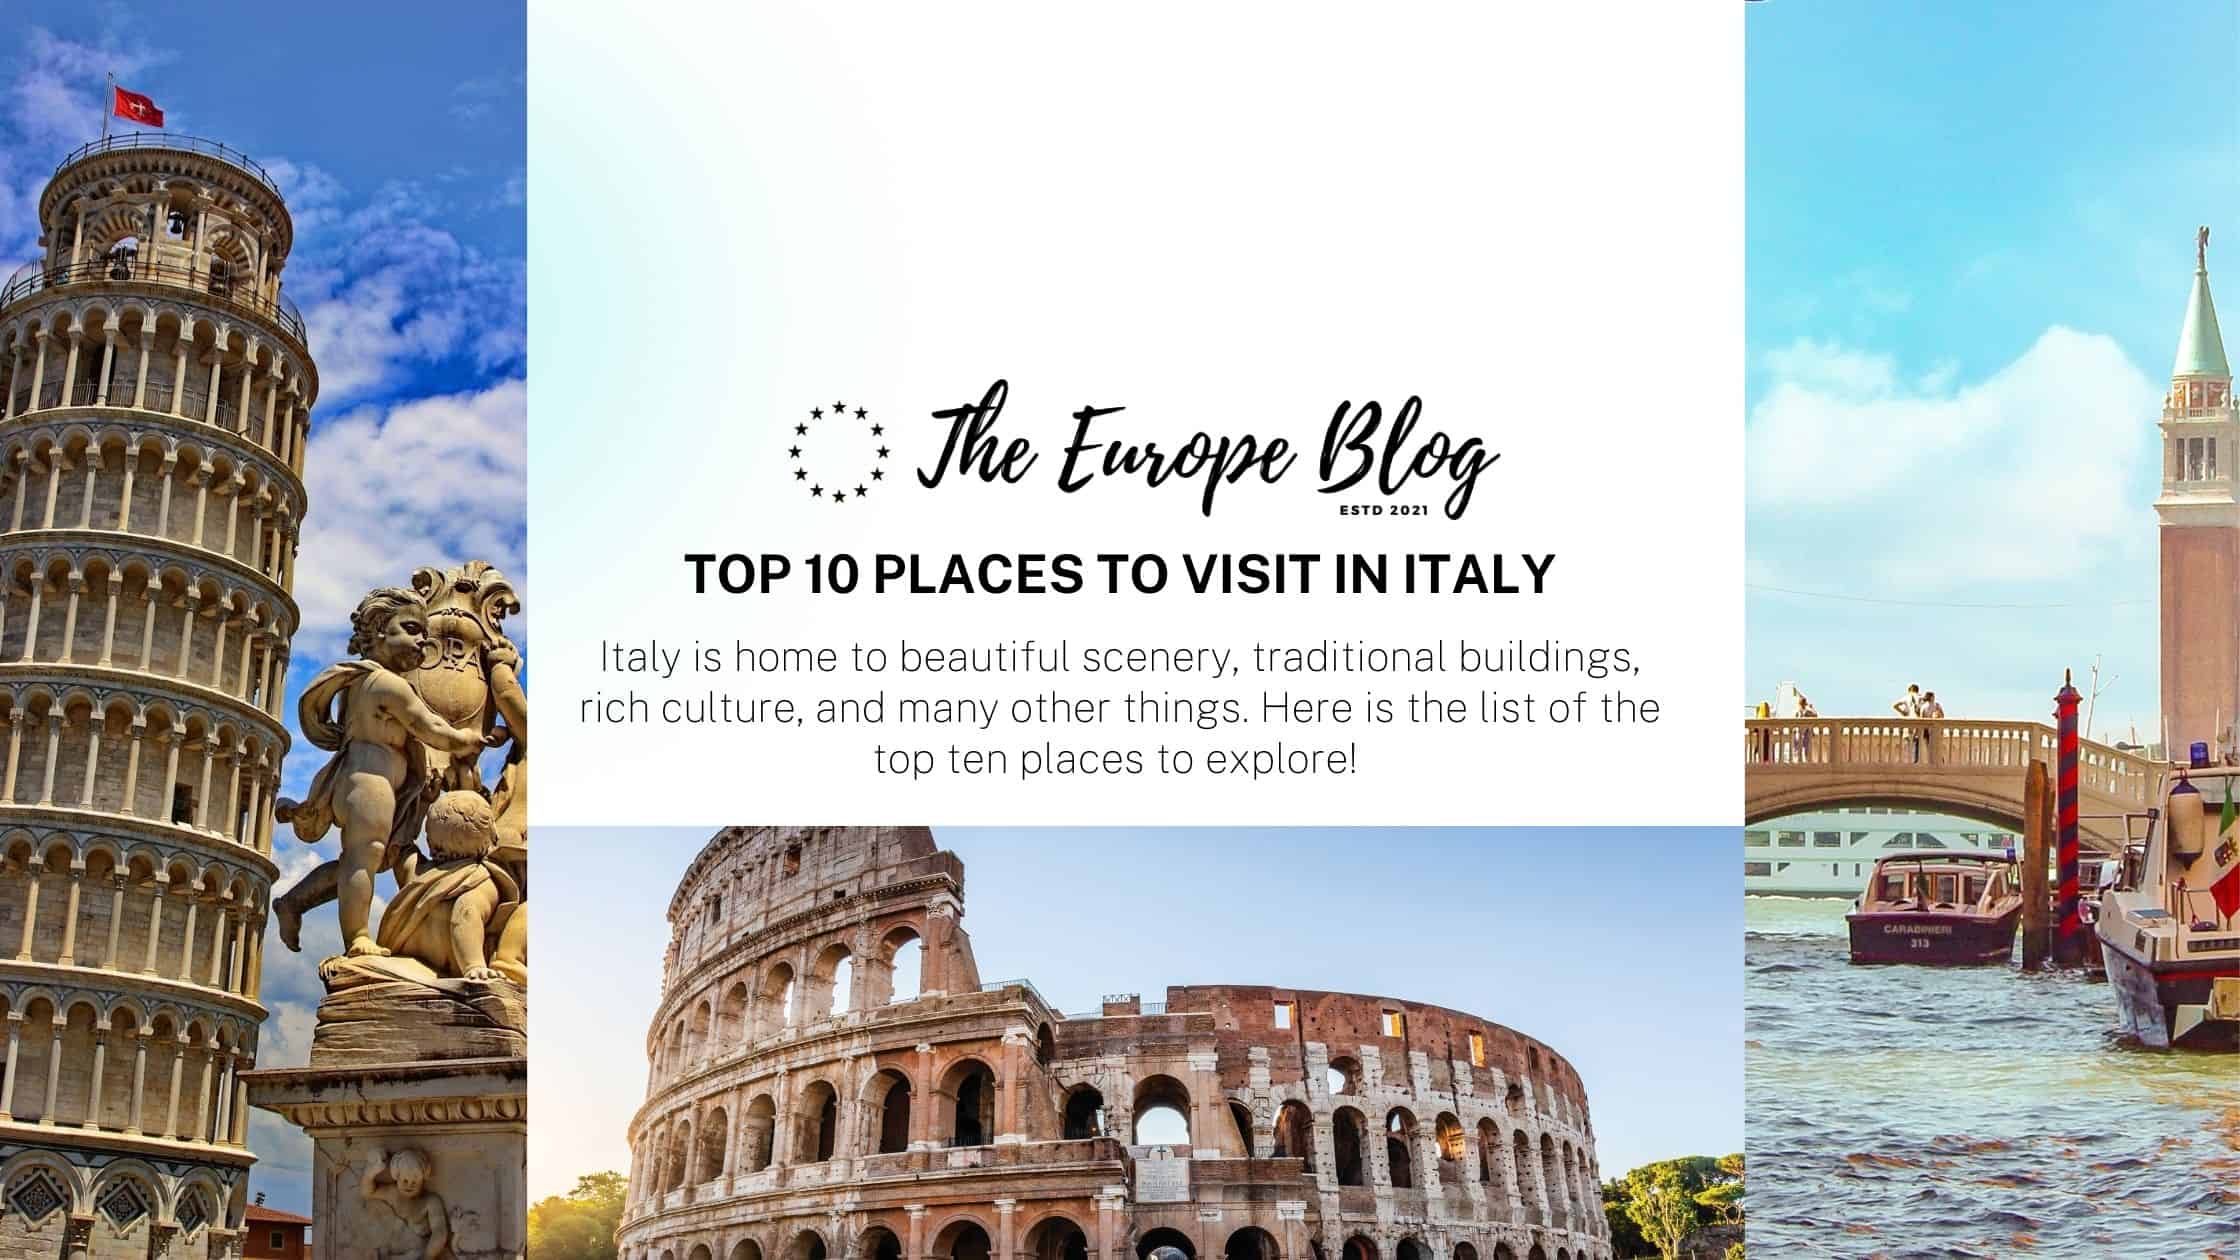 Top 10 Places to Visit in Italy